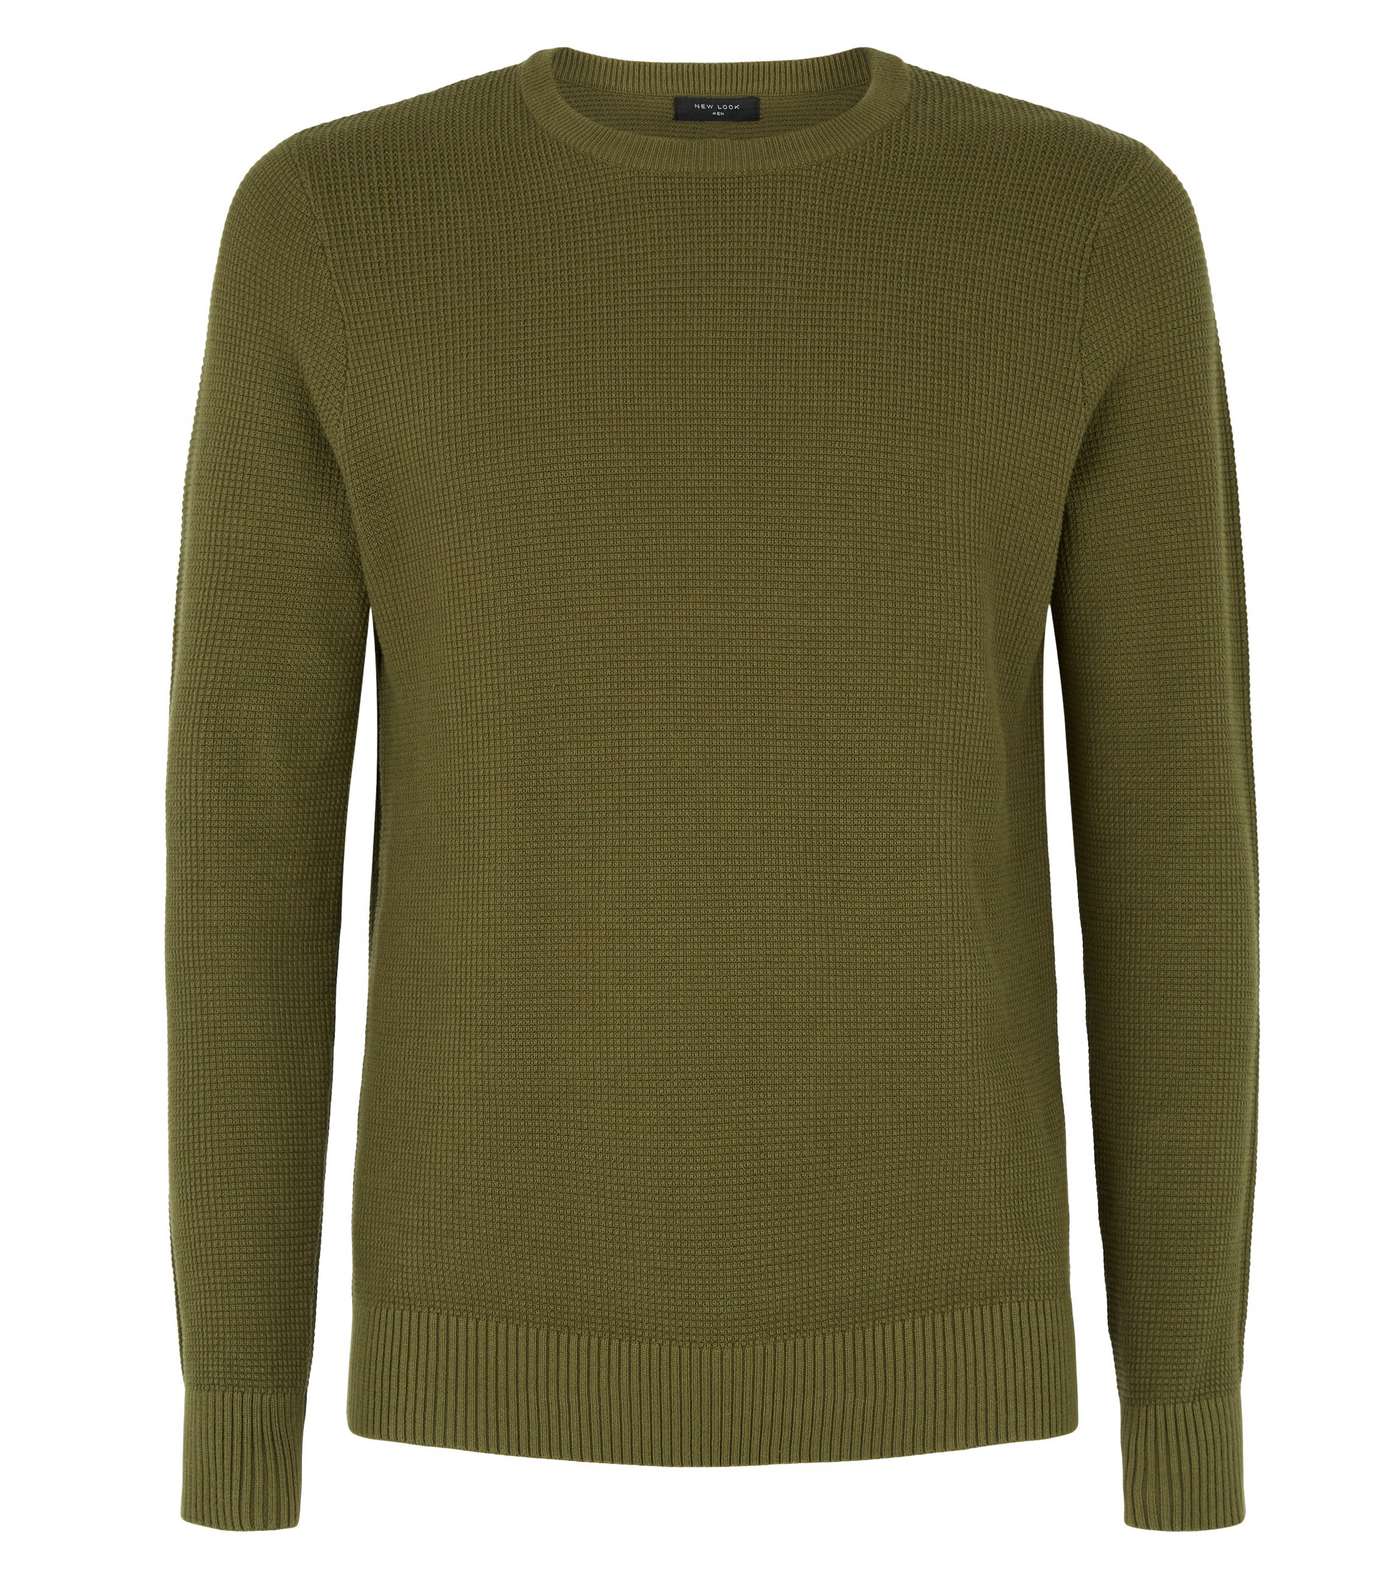 Olive Waffle Knit Muscle Fit Jumper Image 4